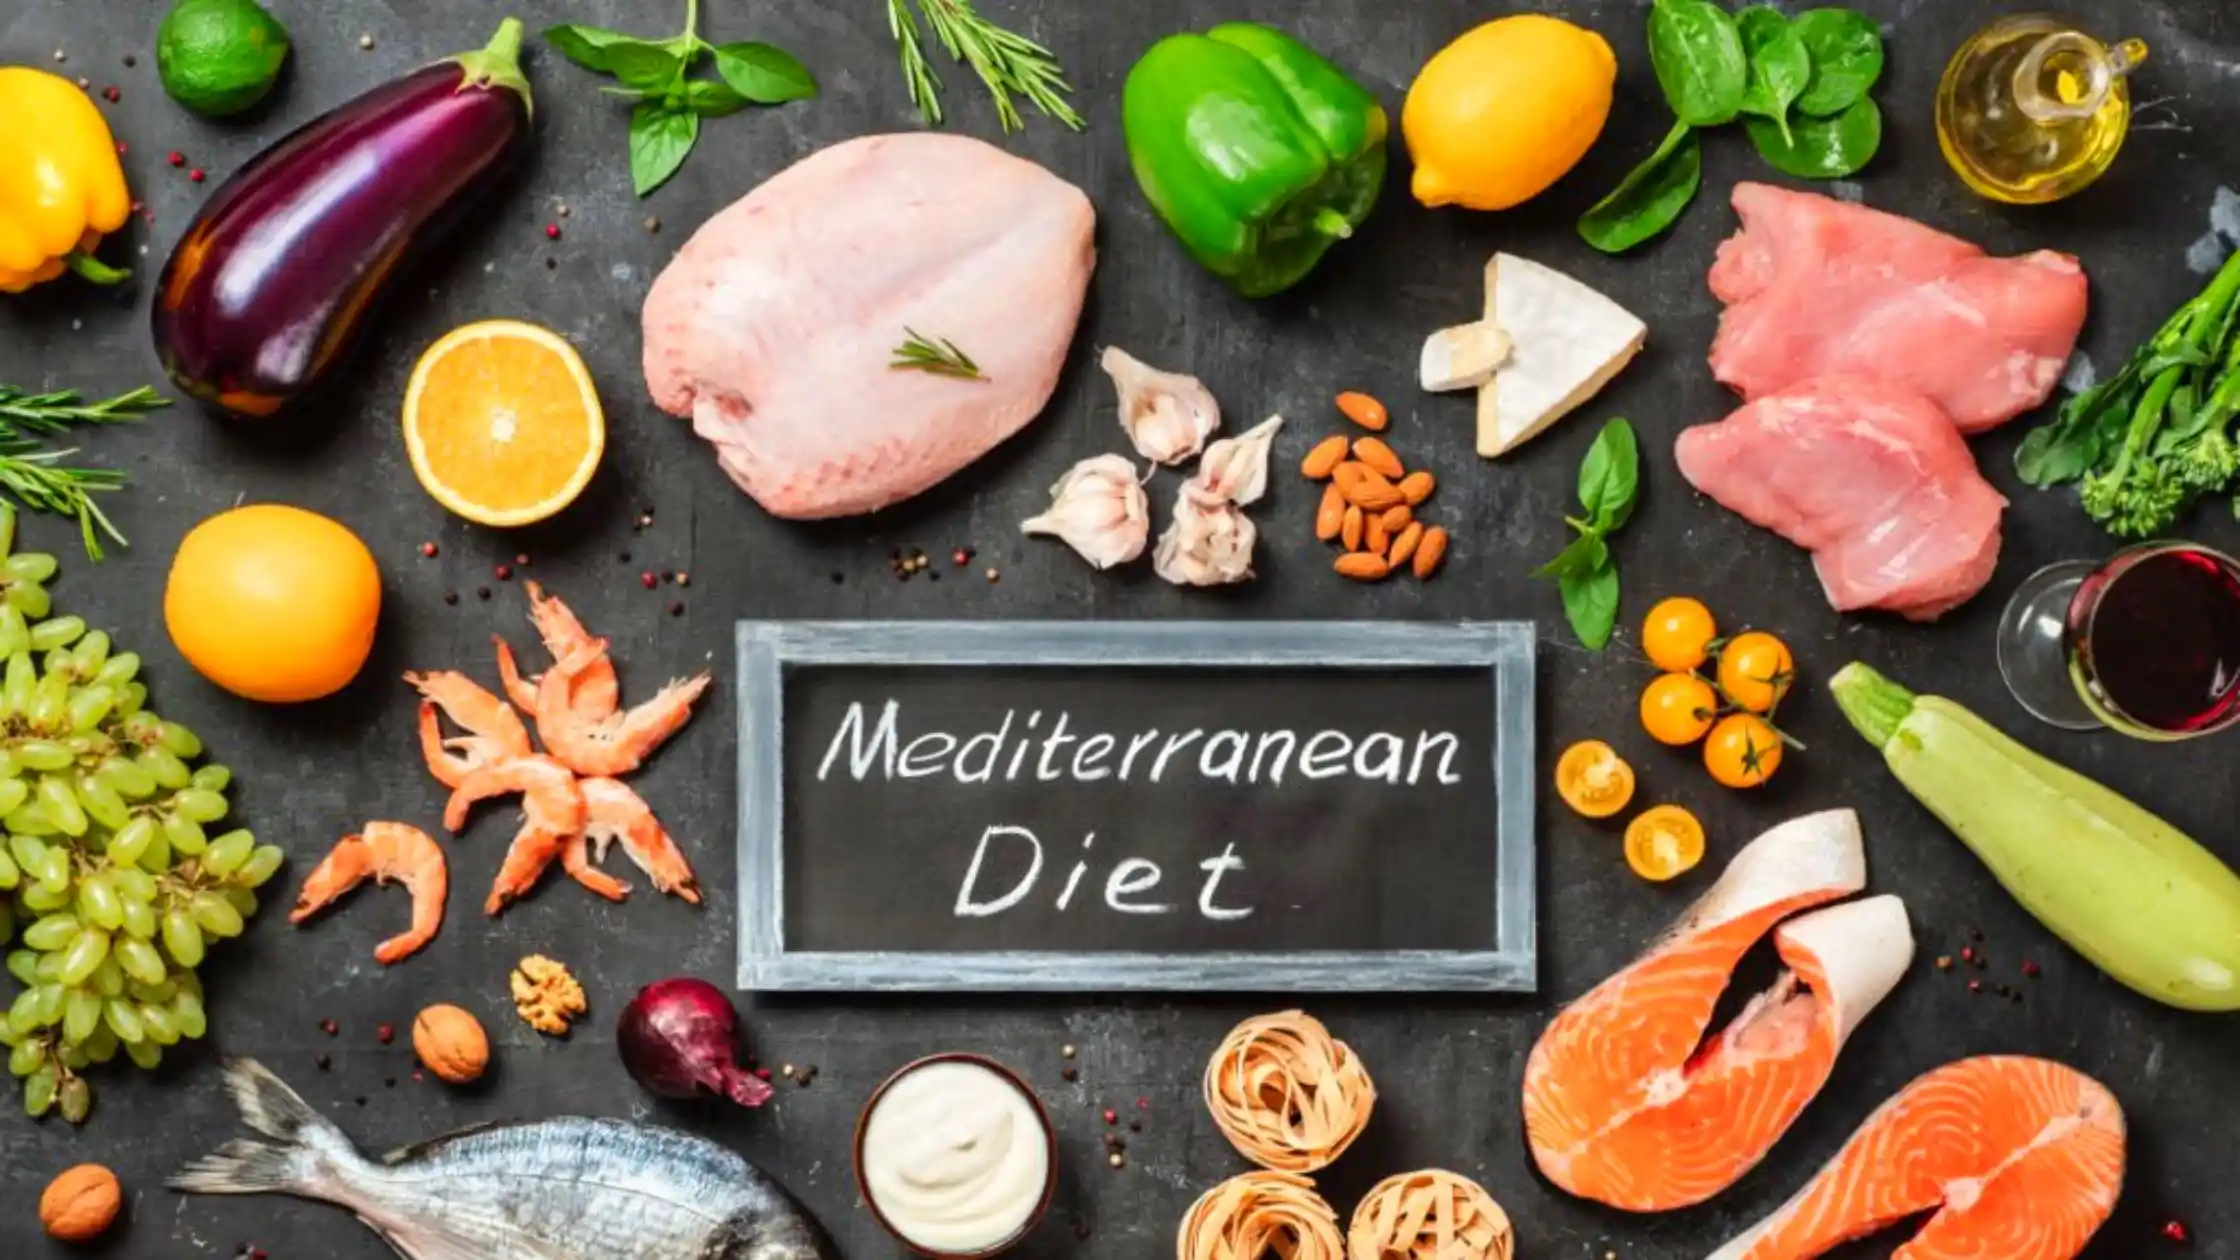 Mediterranean And Mind Diets Can Reduce The Risk Of Alzheimer’s